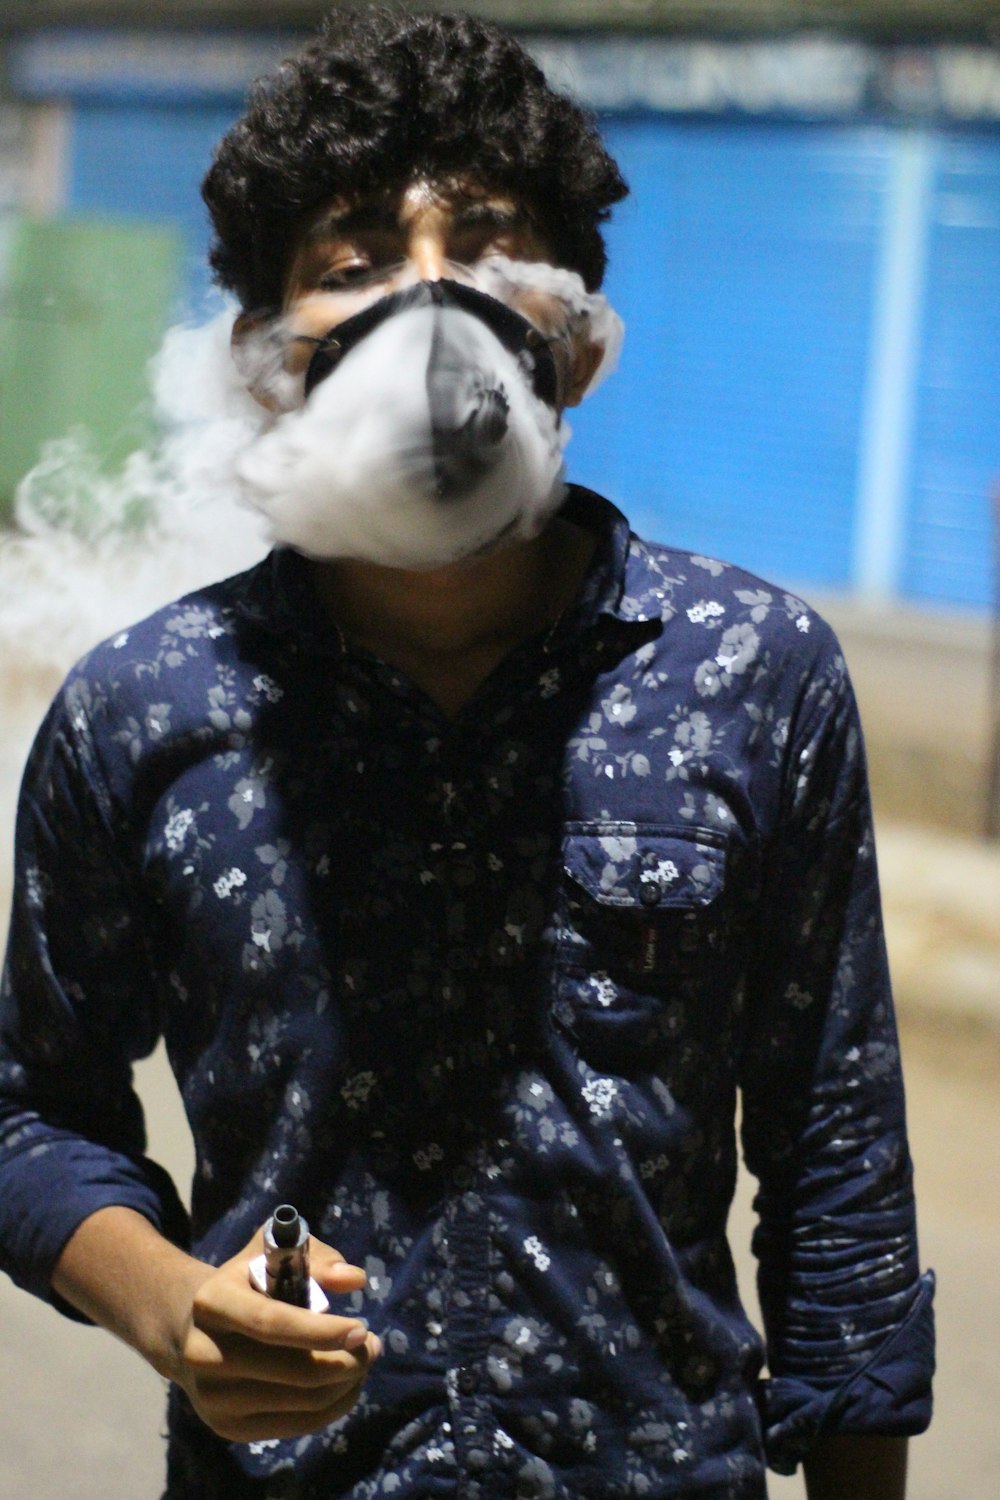 a man smoking a cigarette and wearing a mask